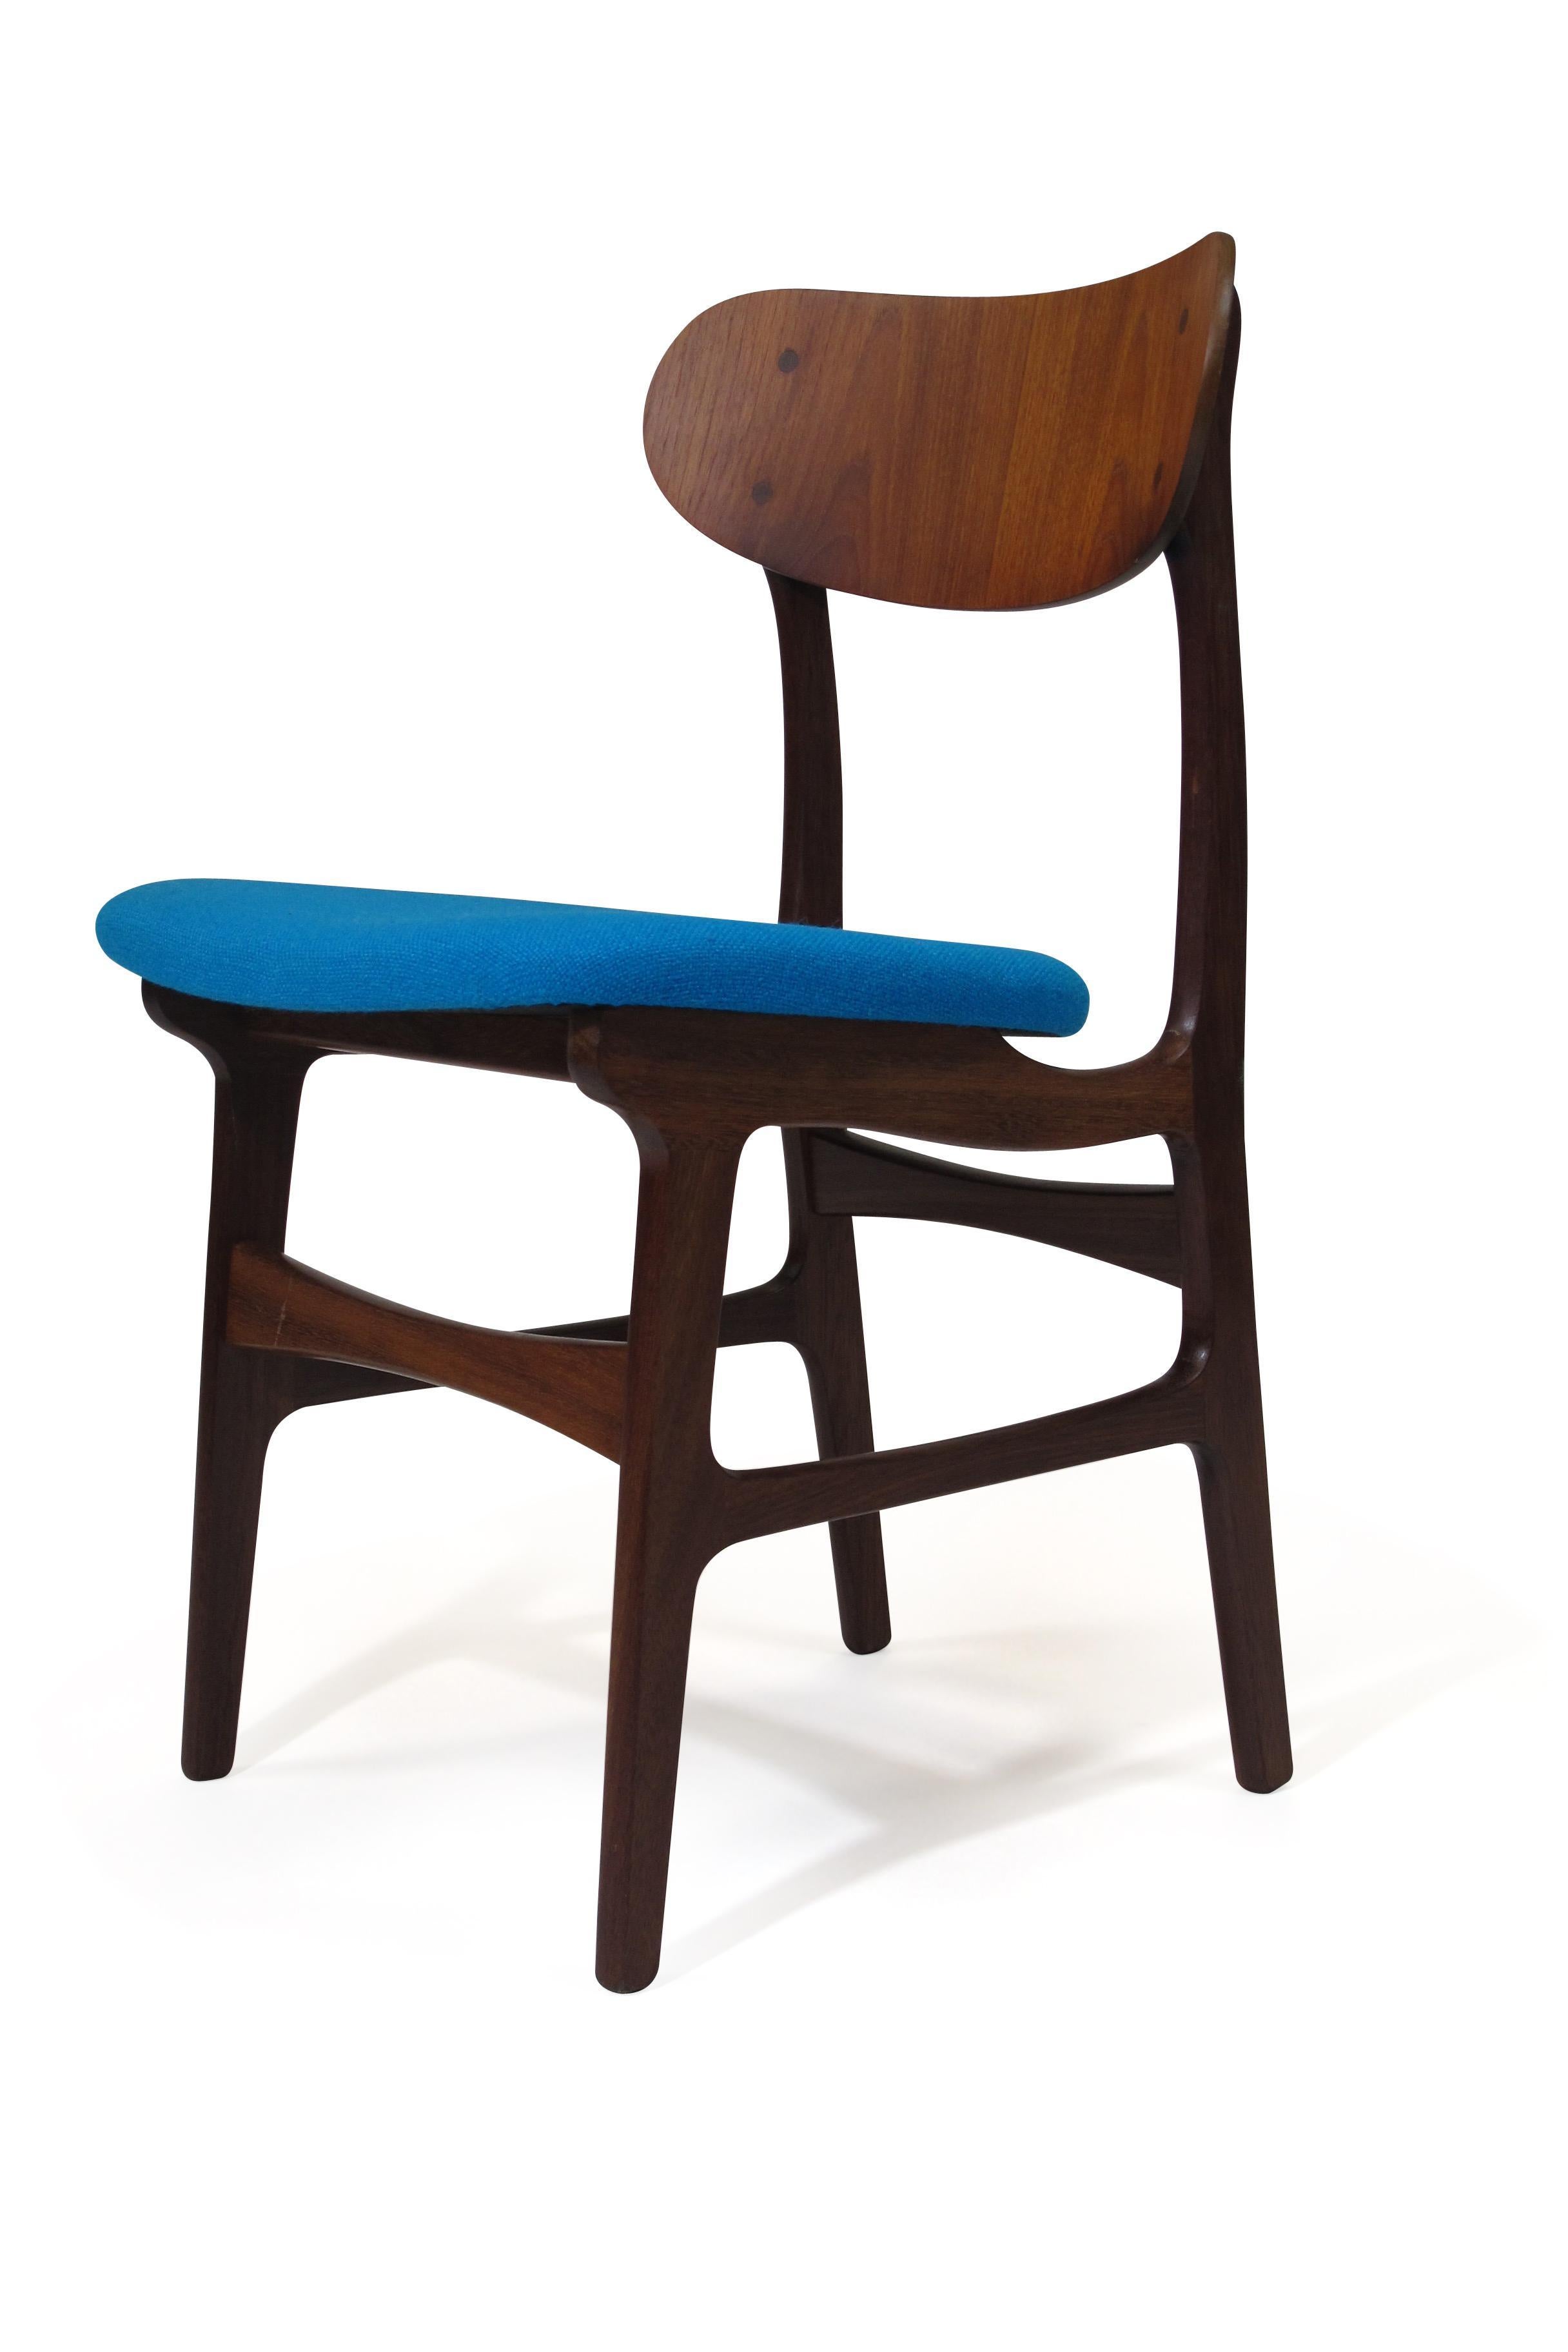 Eight midcentury Danish teak dining chairs with sculpted frames, topped off by bold and comfortable curved back supports. Chairs are newly upholstered in aqua blue wool. Finely restored. Measures: 19